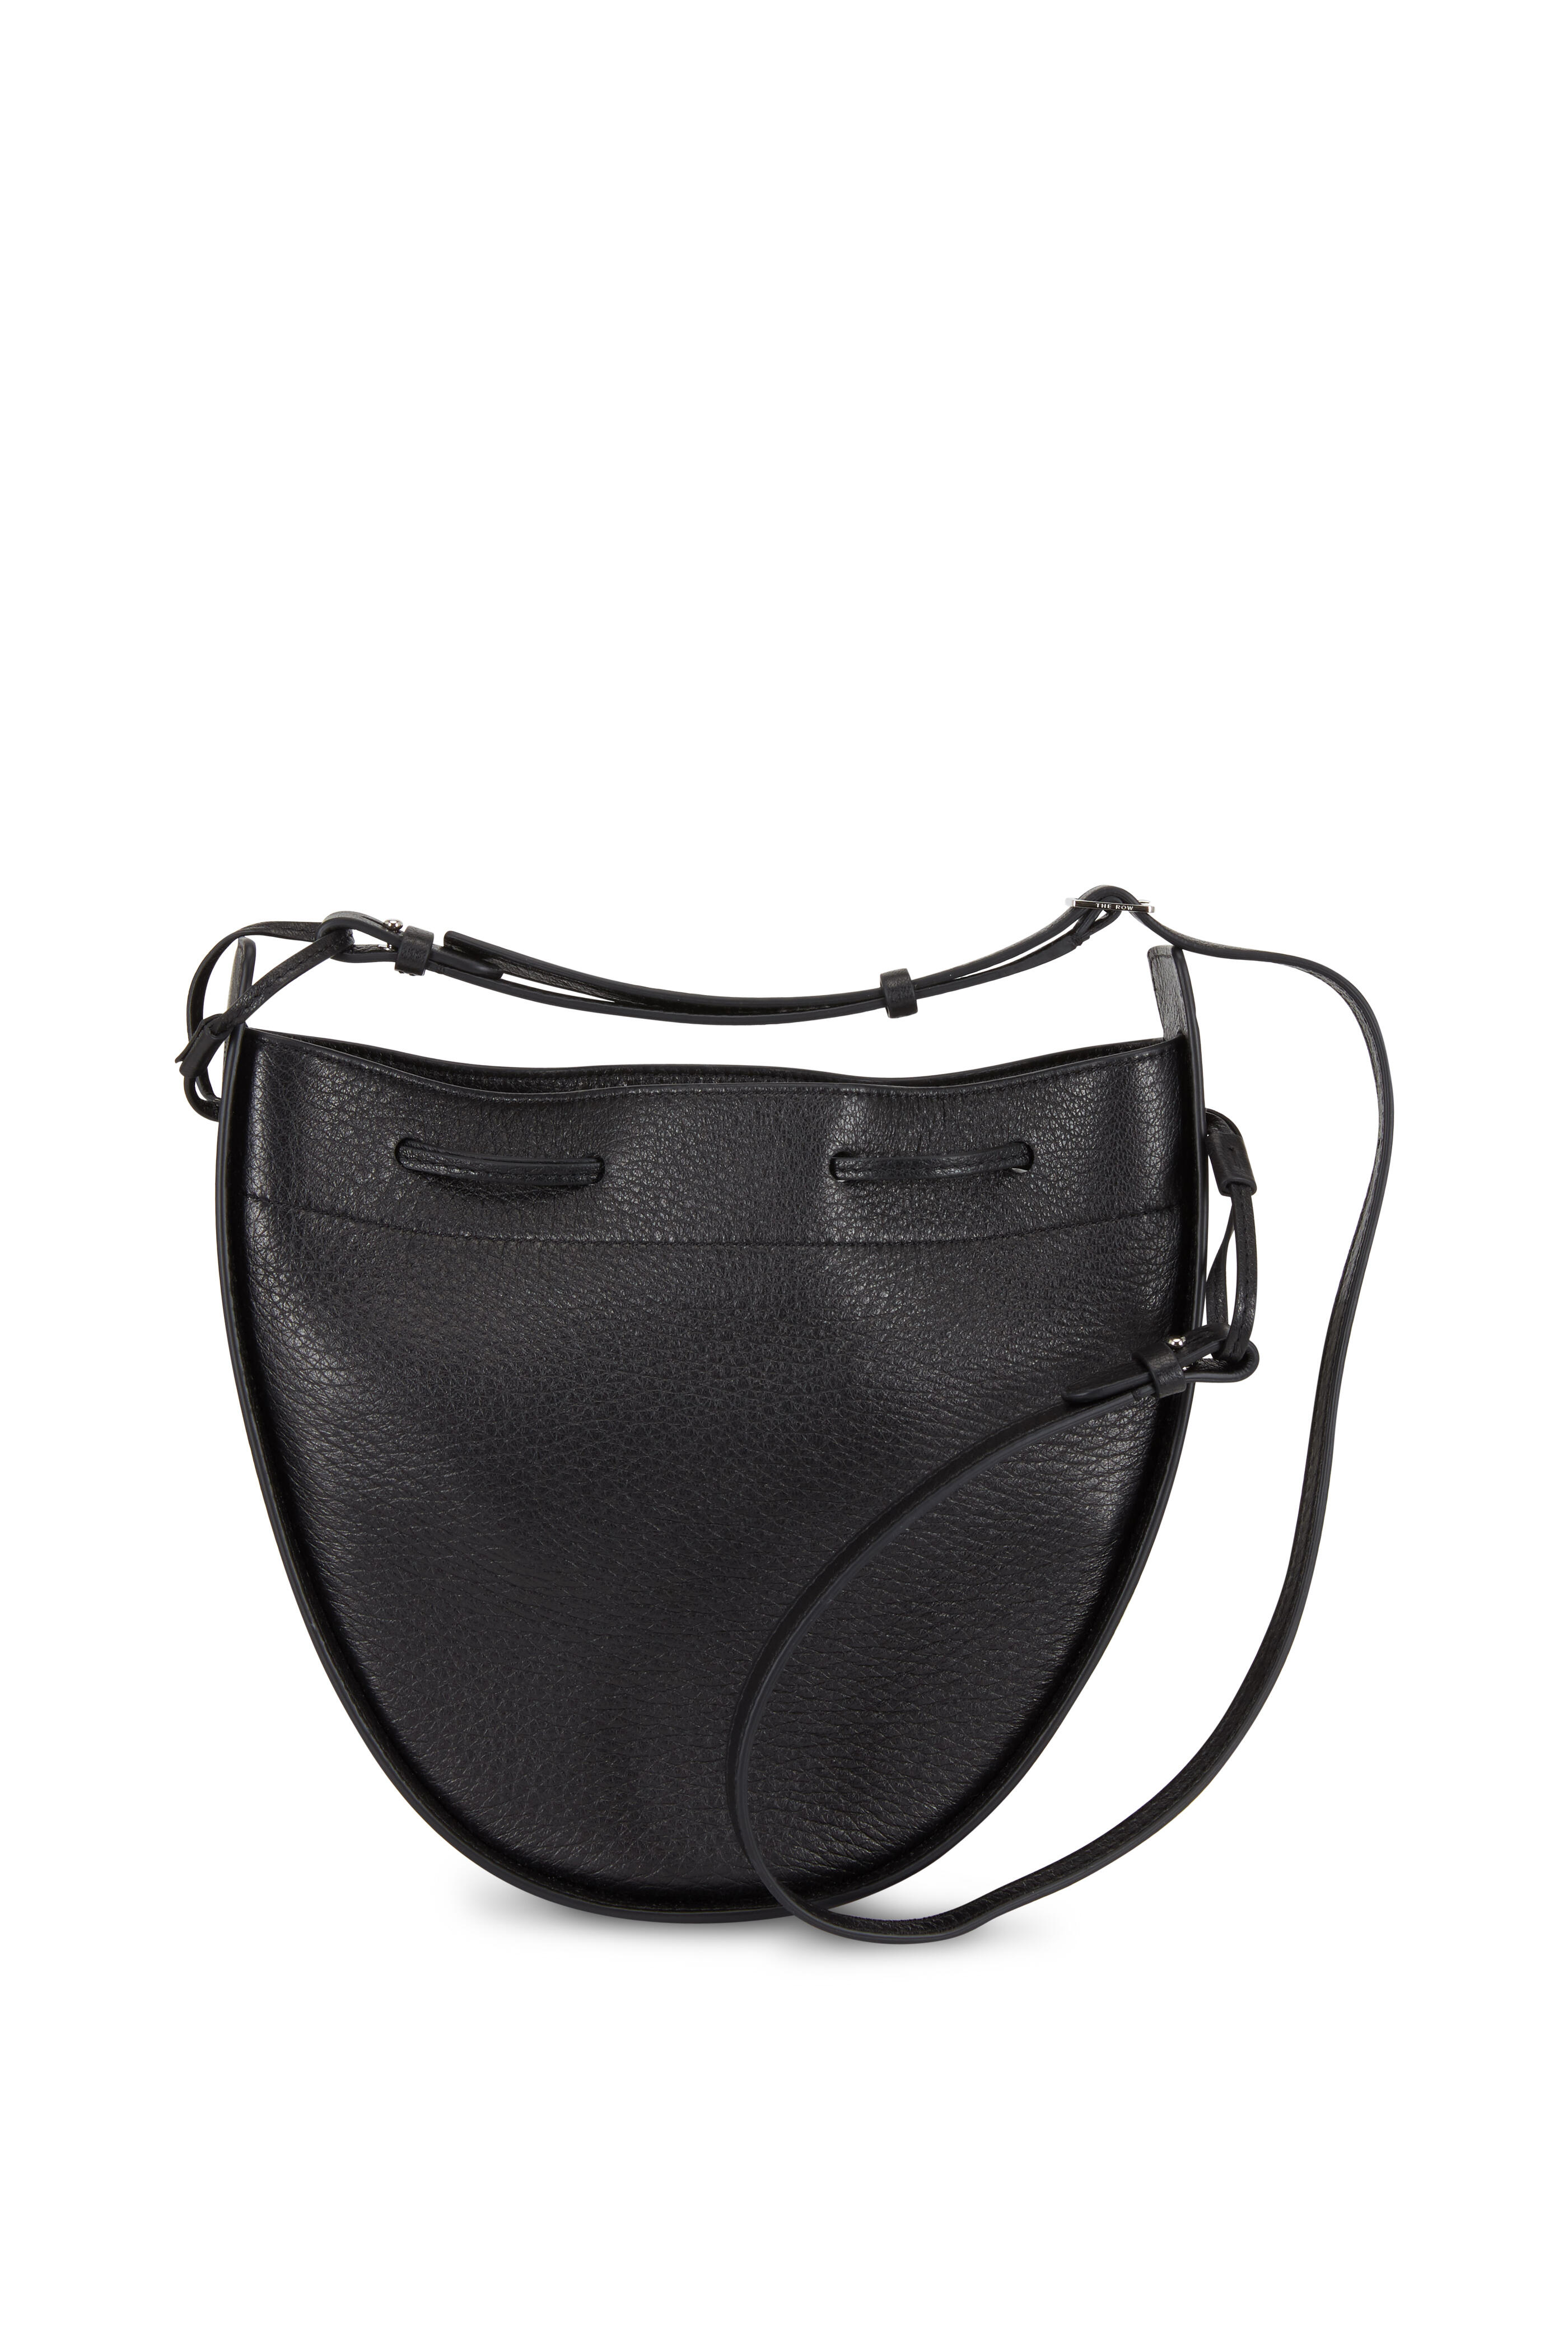 The Row - Black Leather Drawstring Pouch Crossbody Bag